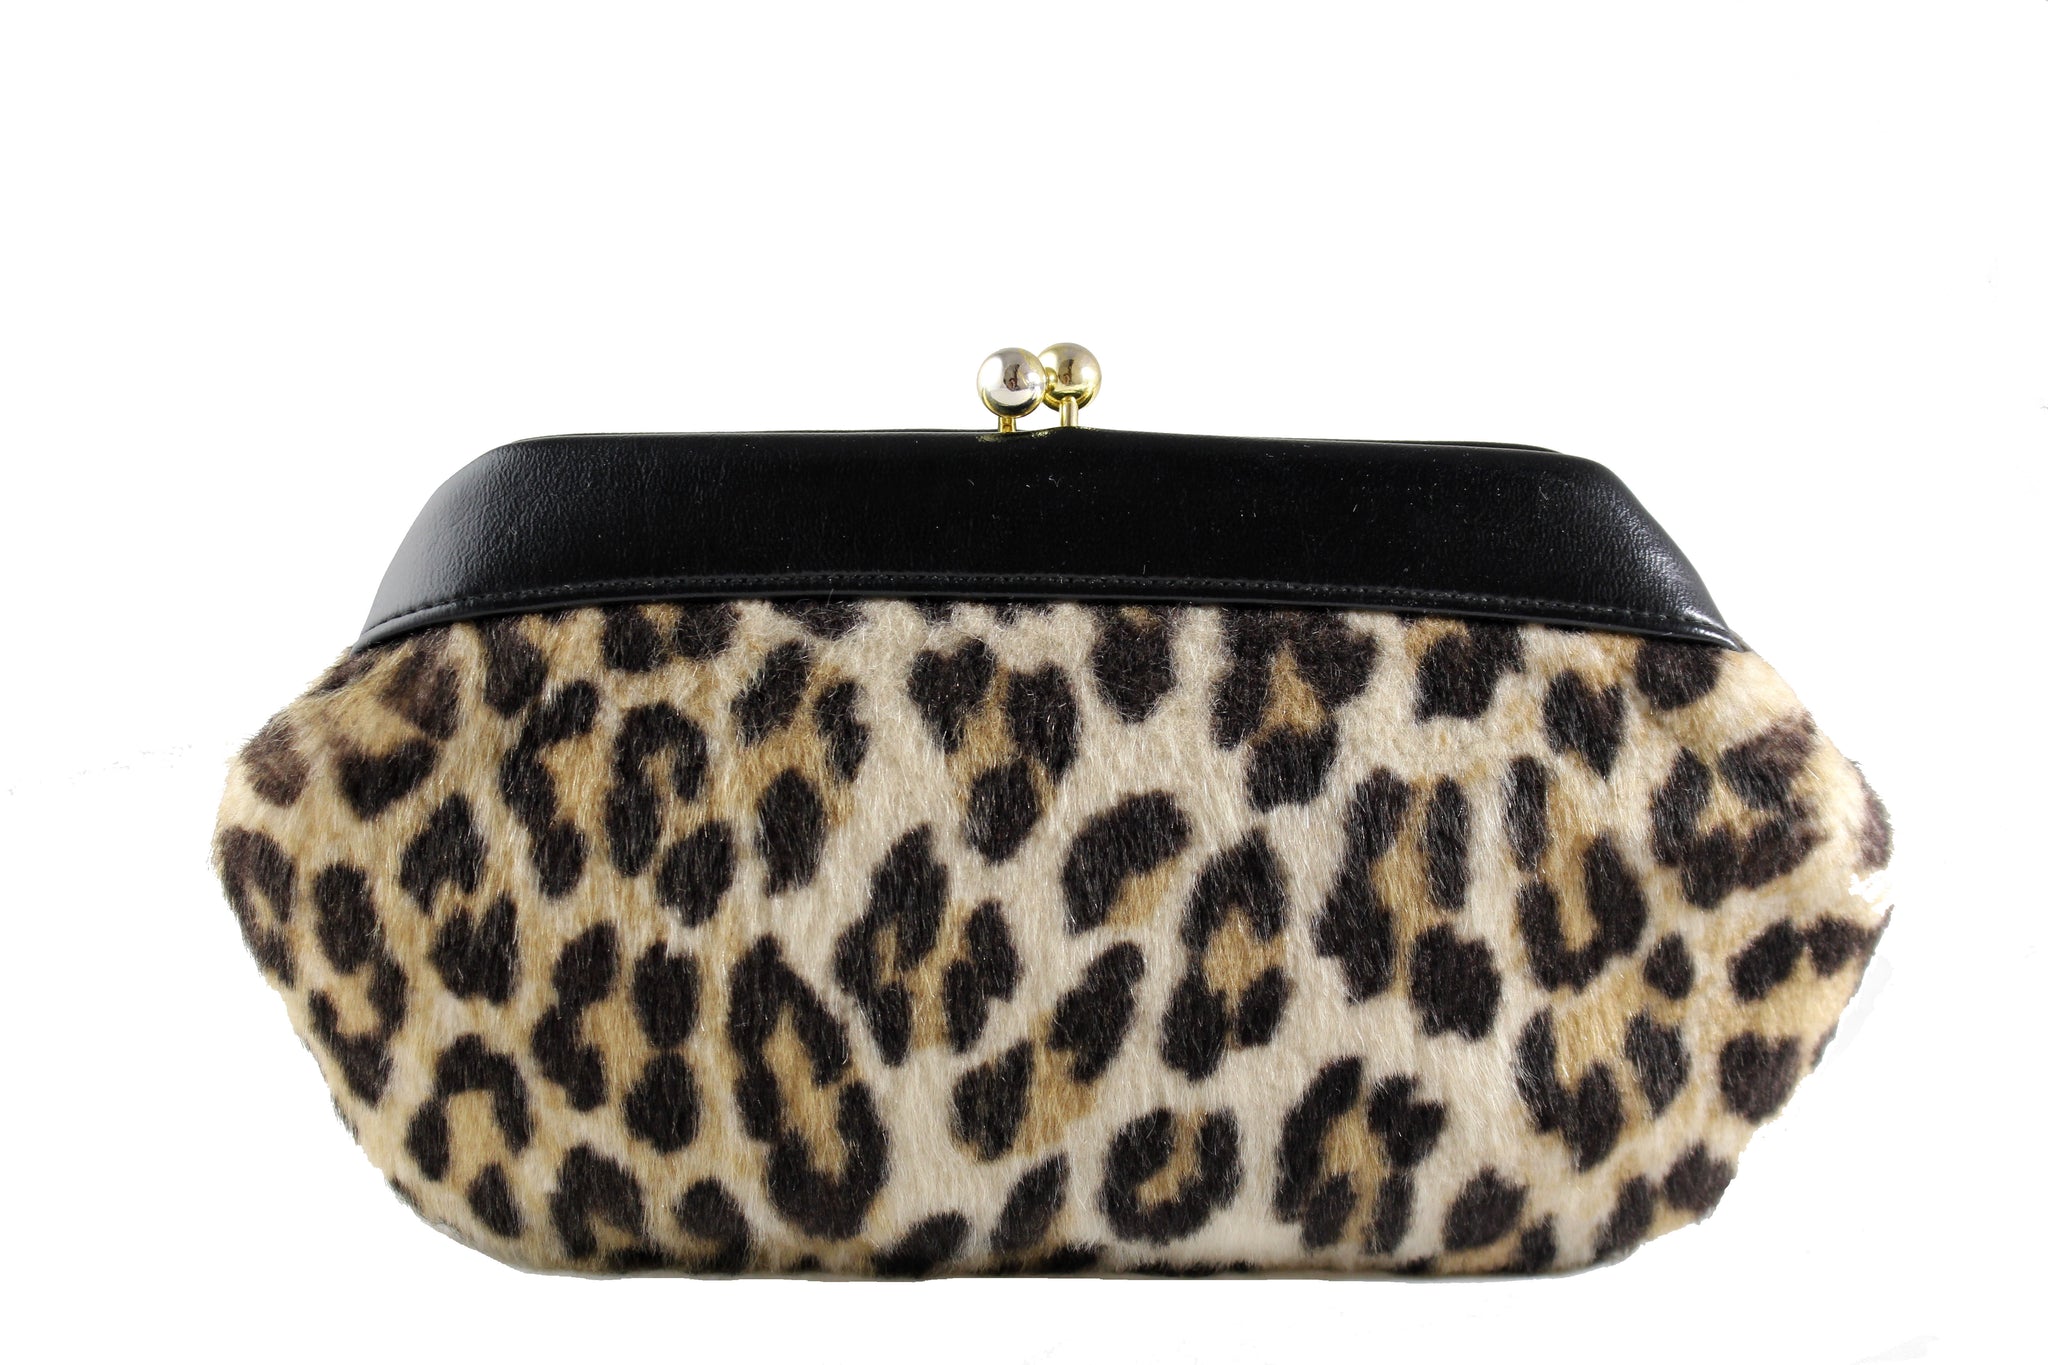 Charming Tailor | Bags | Leopard Print Clutch Purse With Chain Strap |  Poshmark